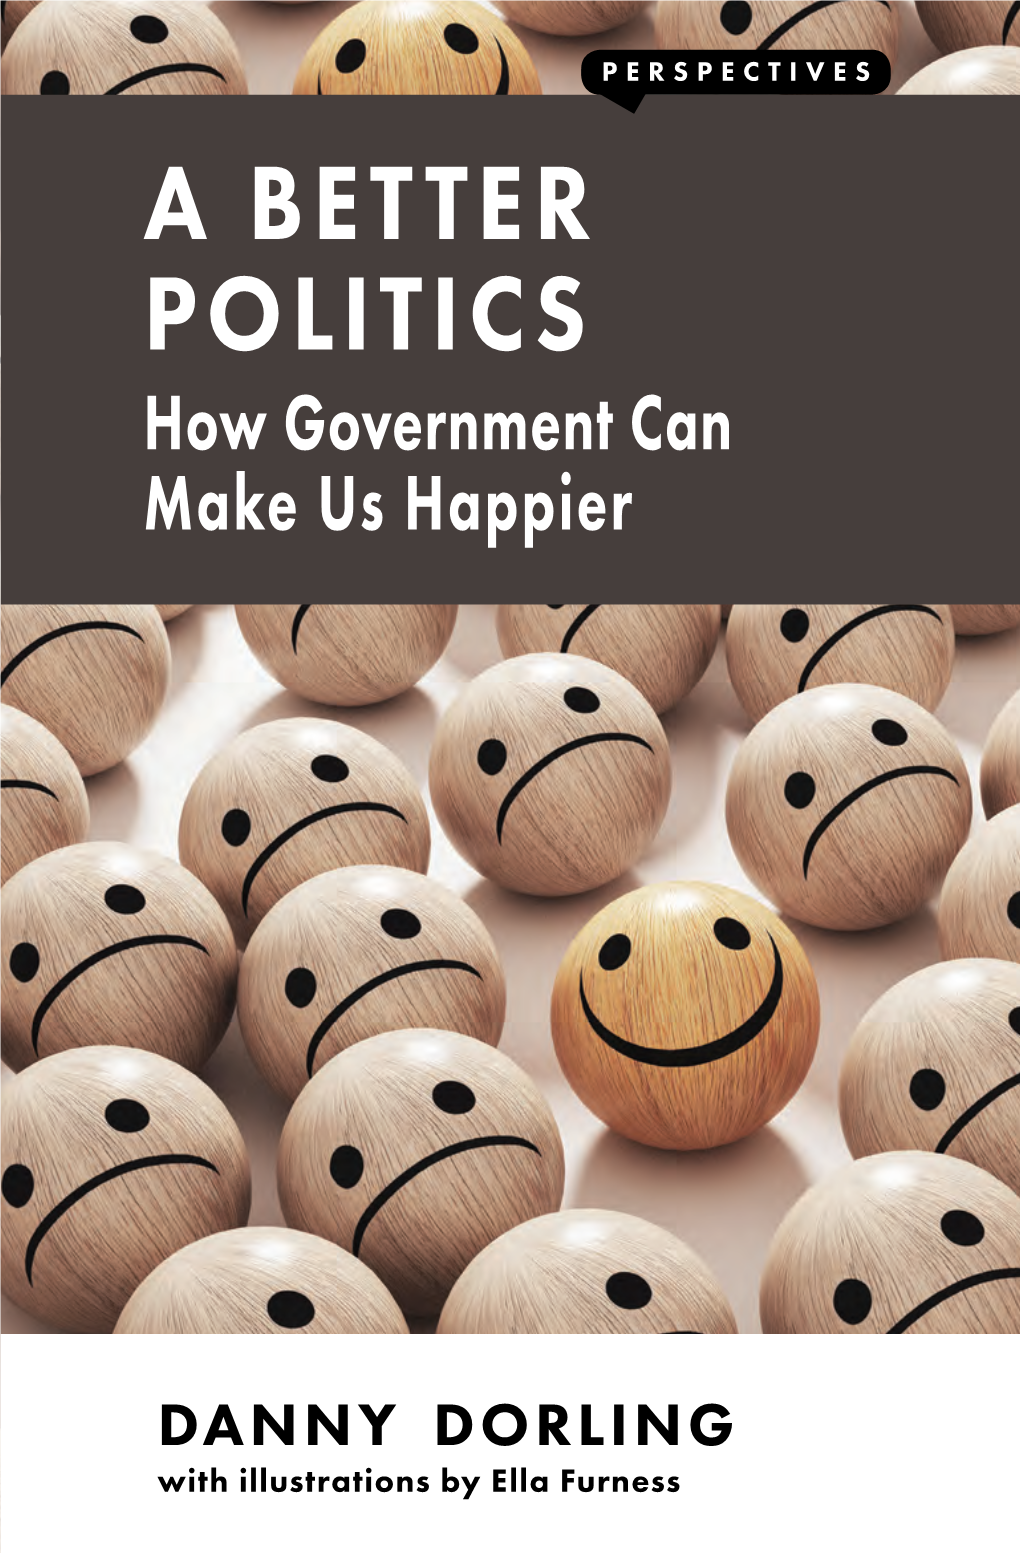 A BETTER POLITICS How Government Can Make Us Happier